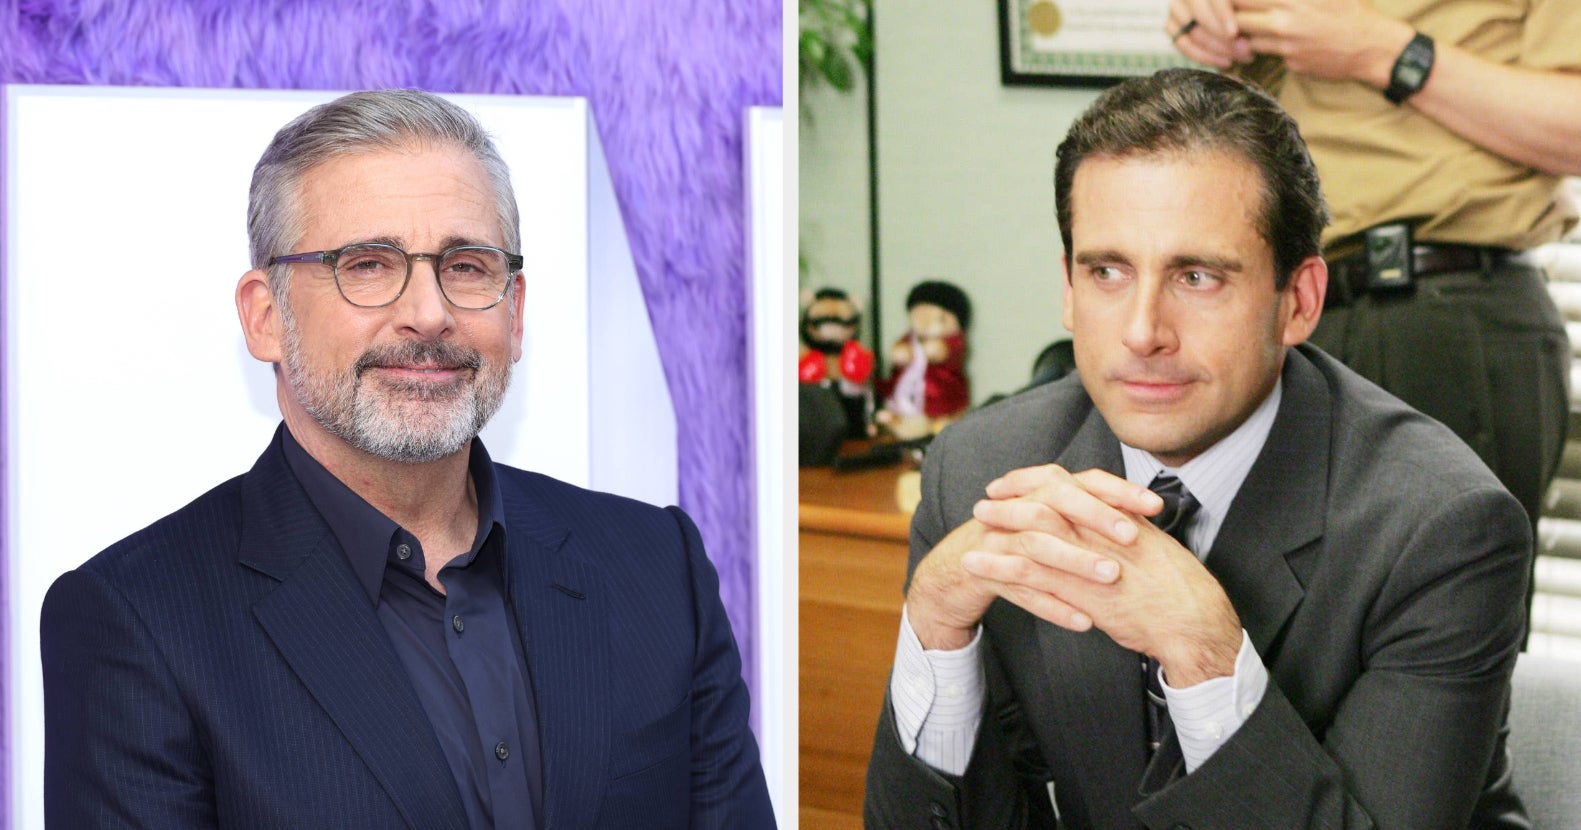 Steve Carell said he won’t appear in new series The Office